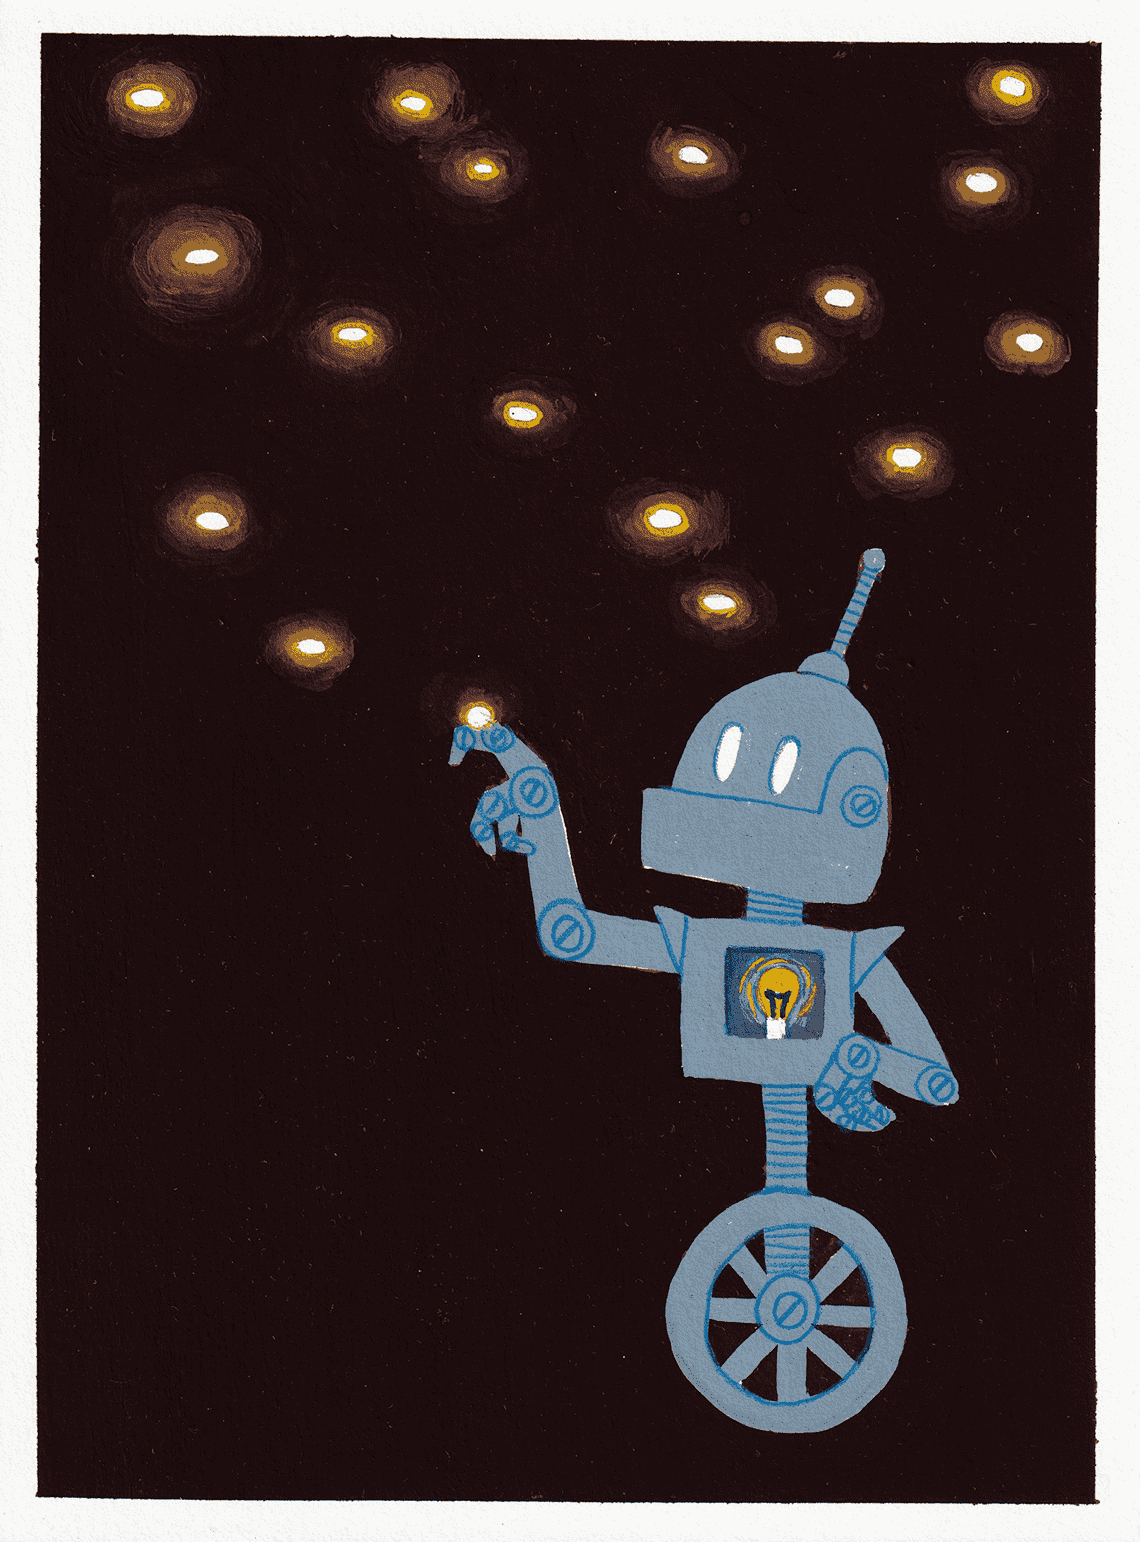 Gouache illustration of a robot touching a firefly with its metal hand.